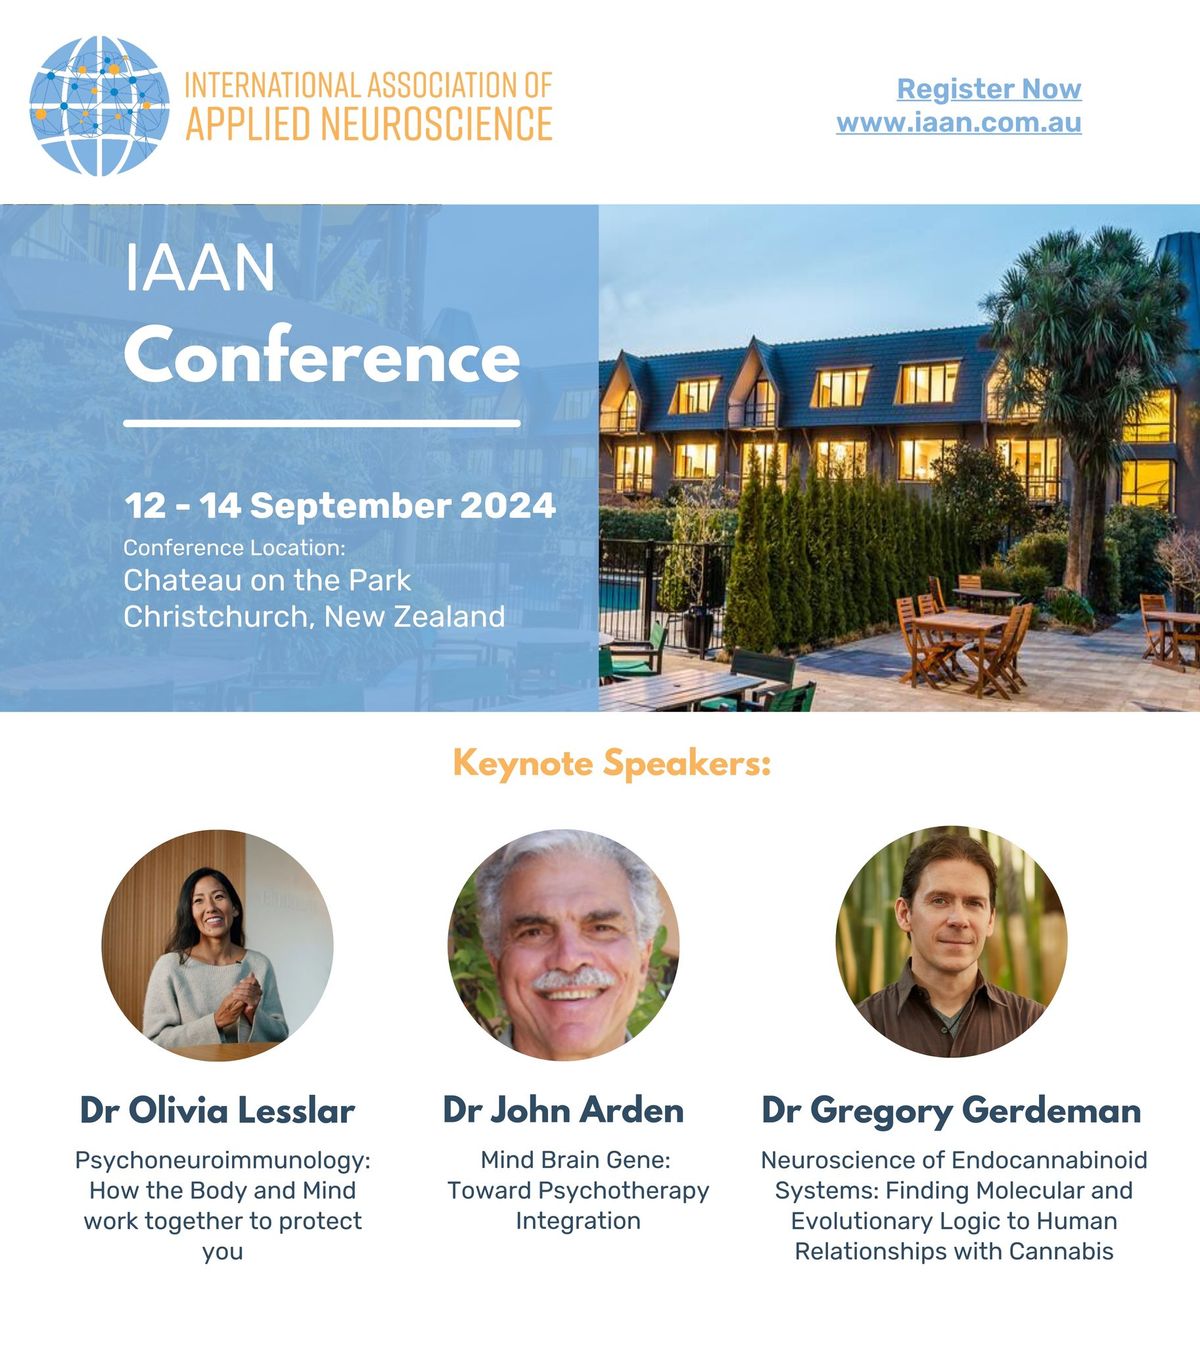 The 2024 International Association of Applied Neuroscience Conference